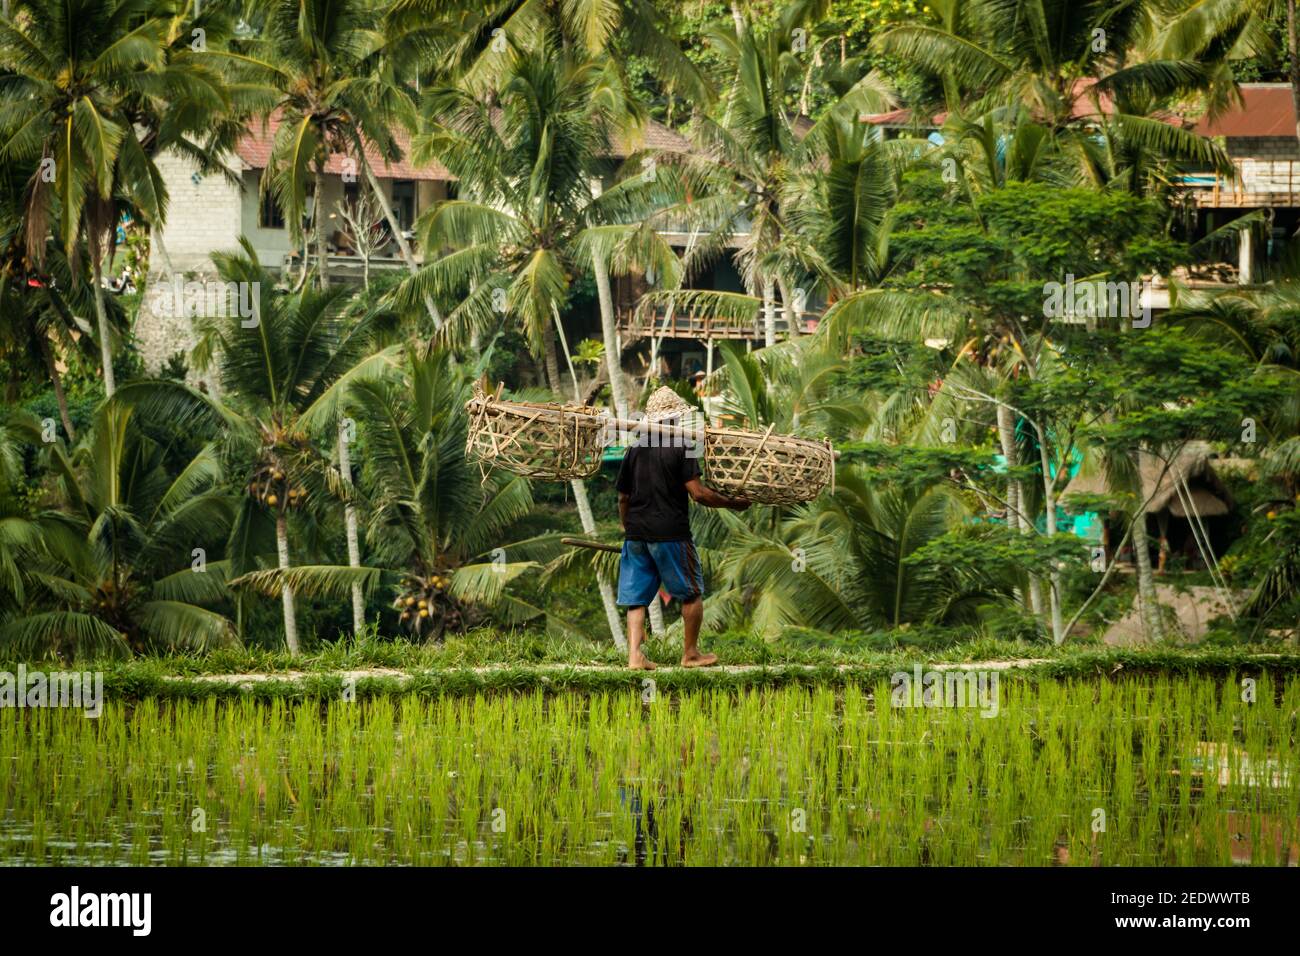 A male rice farmer carrying rice harvest basket by the rice fields at Tegallalang Rice Terrace in Bali Stock Photo